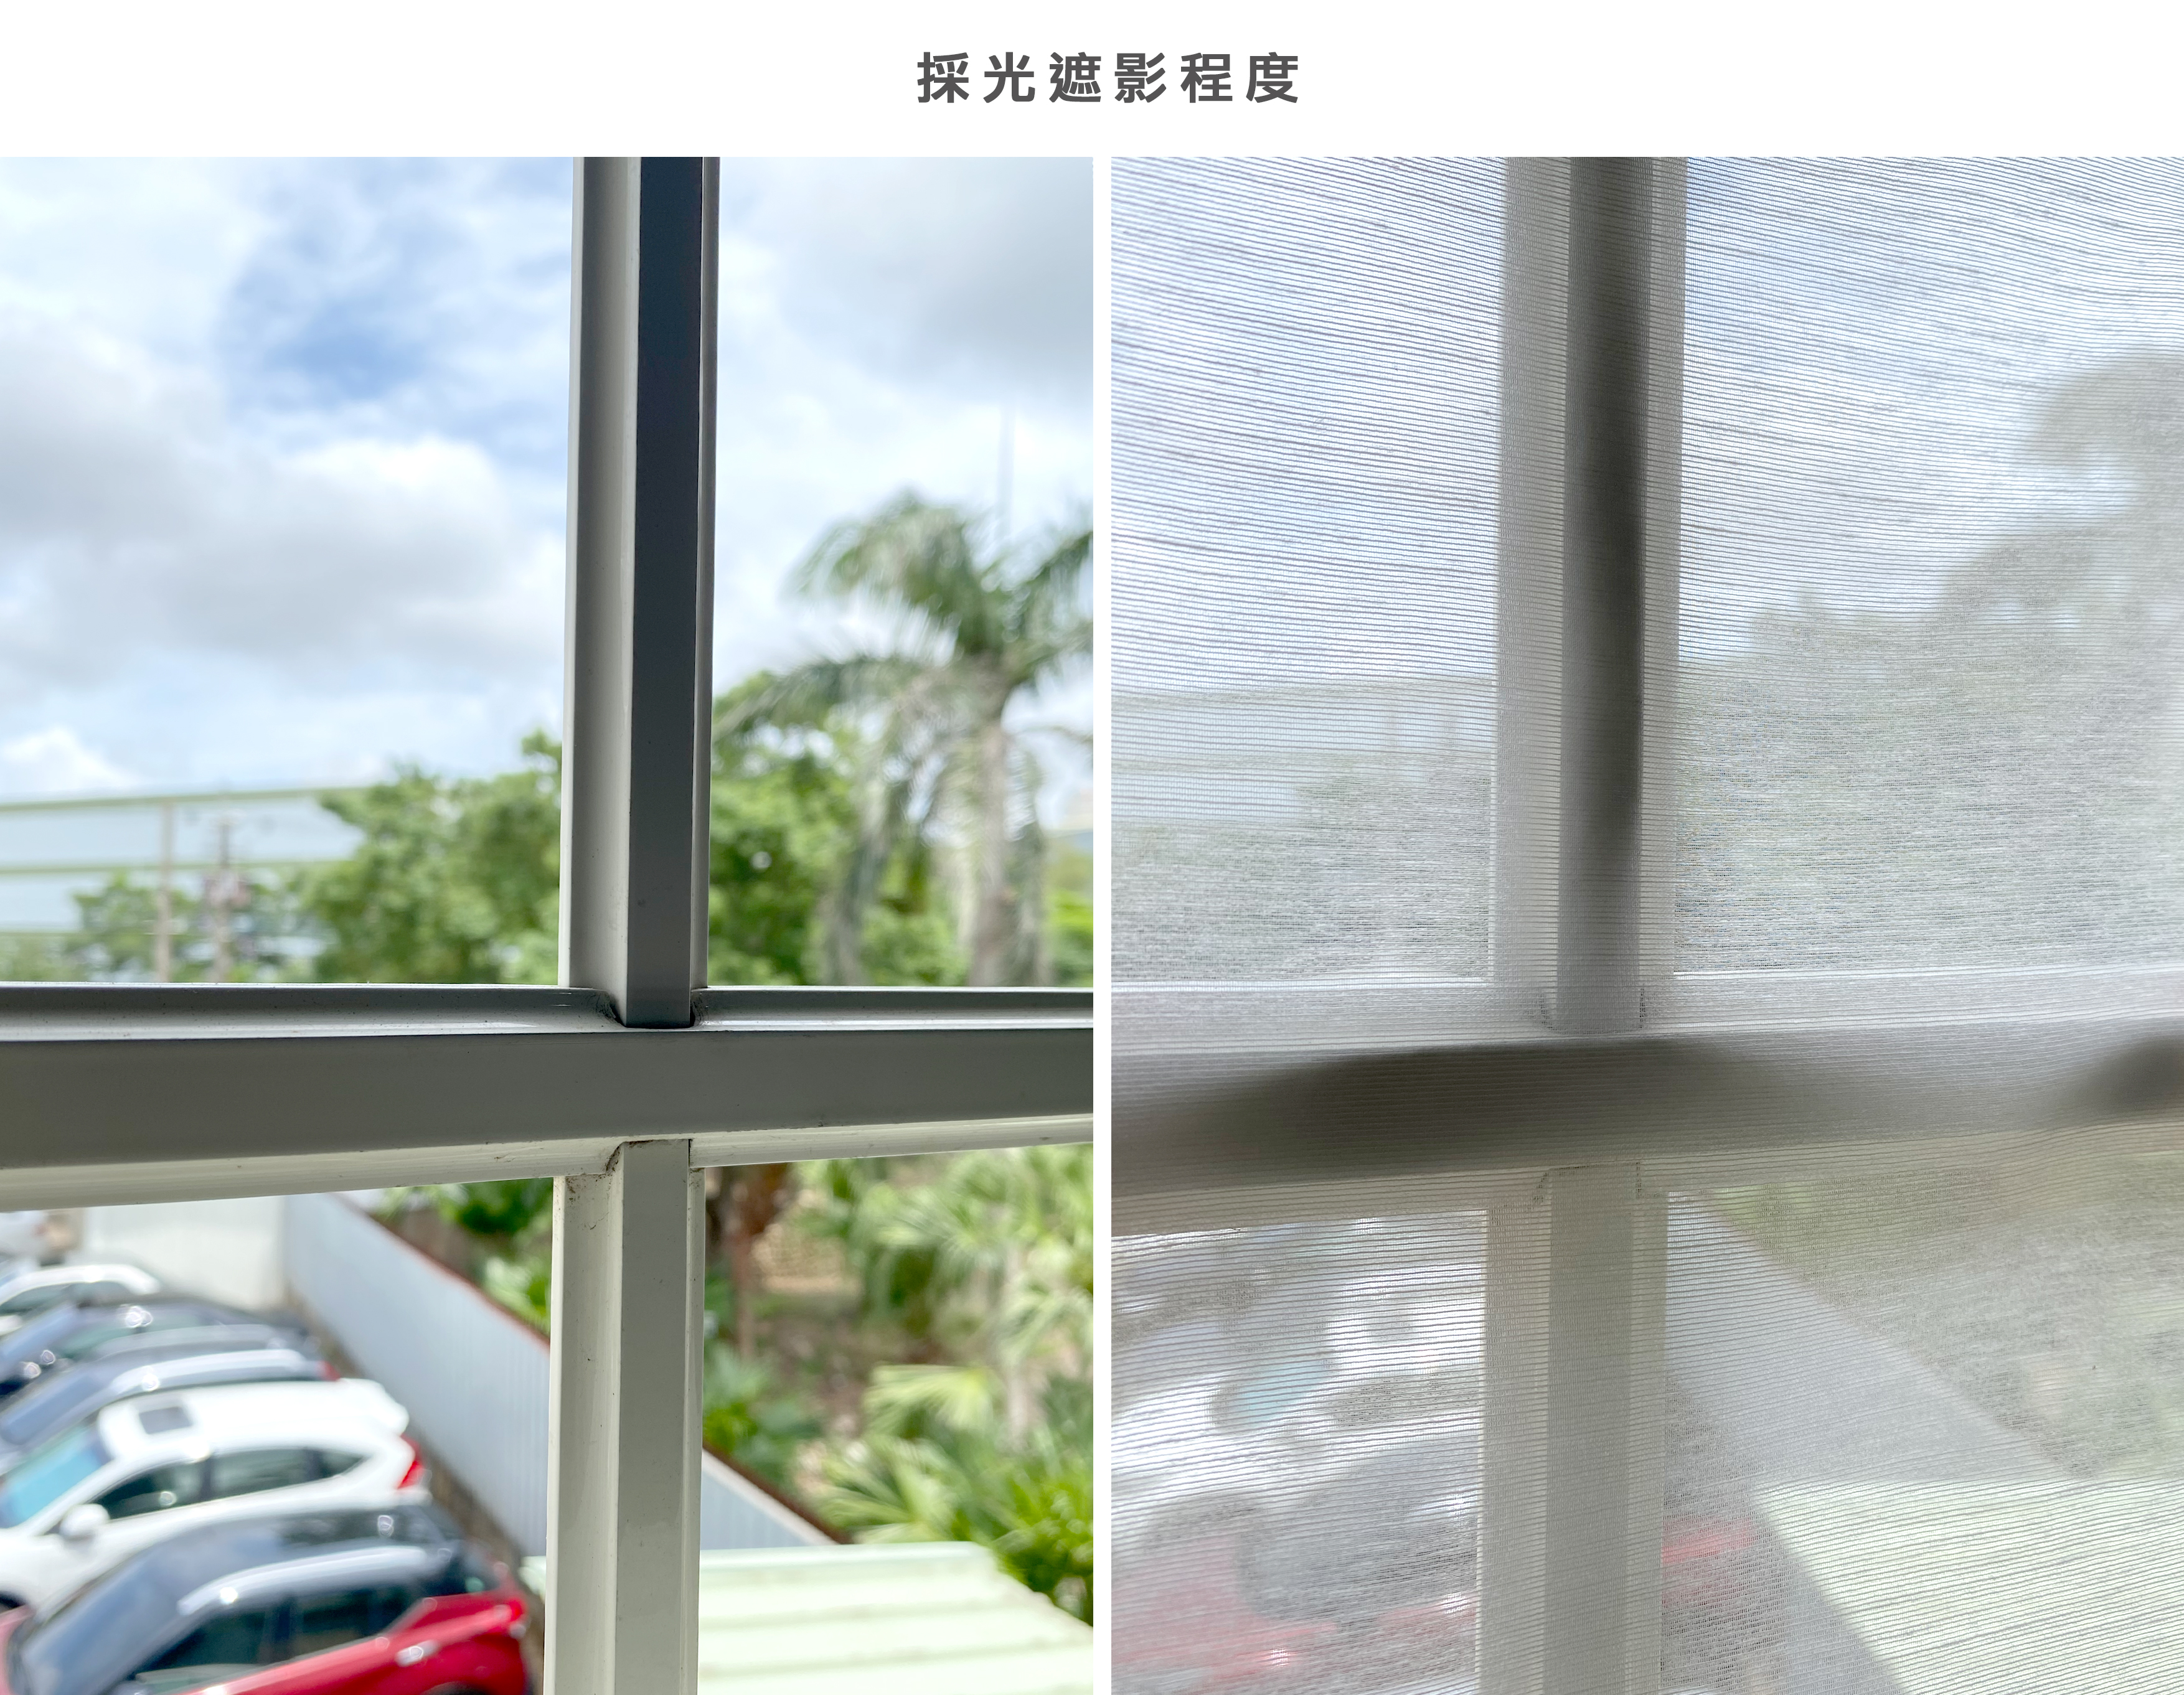 Lo-Fi House Select Curtains　Sheer Gauze Sheer - White Child Safety／Cordless Blinds & Shades Light Filtering Blinds & Shades Semi-Transparent Blinds & Shades Motorized Blinds／Smart Blinds & Shades